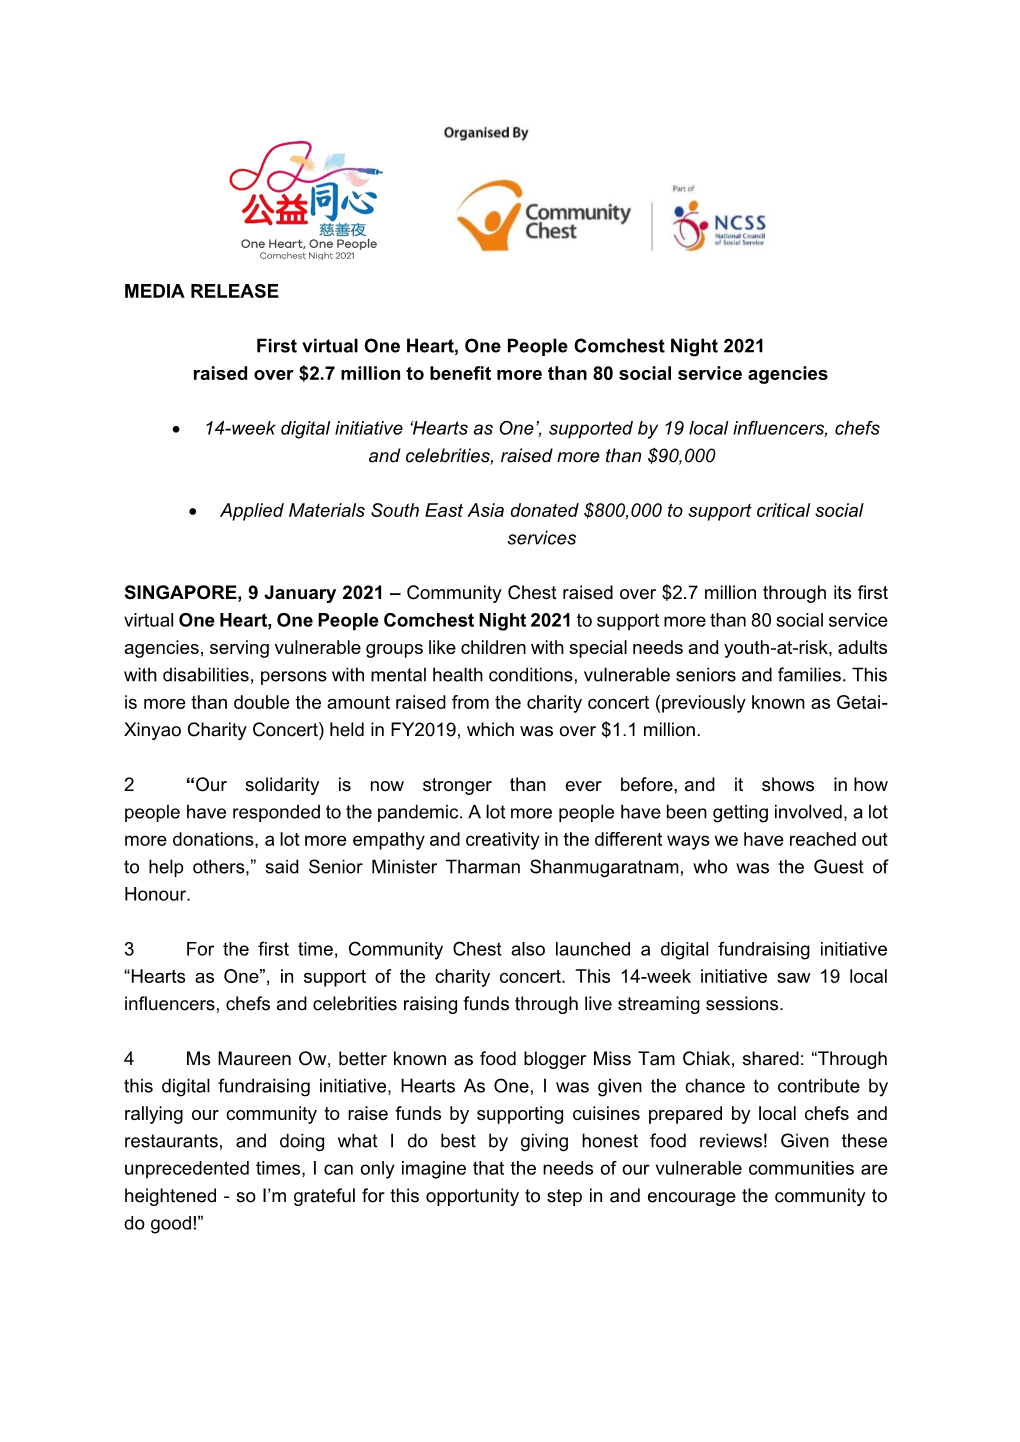 MEDIA RELEASE First Virtual One Heart, One People Comchest Night 2021 Raised Over $2.7 Million to Benefit More Than 80 Social S